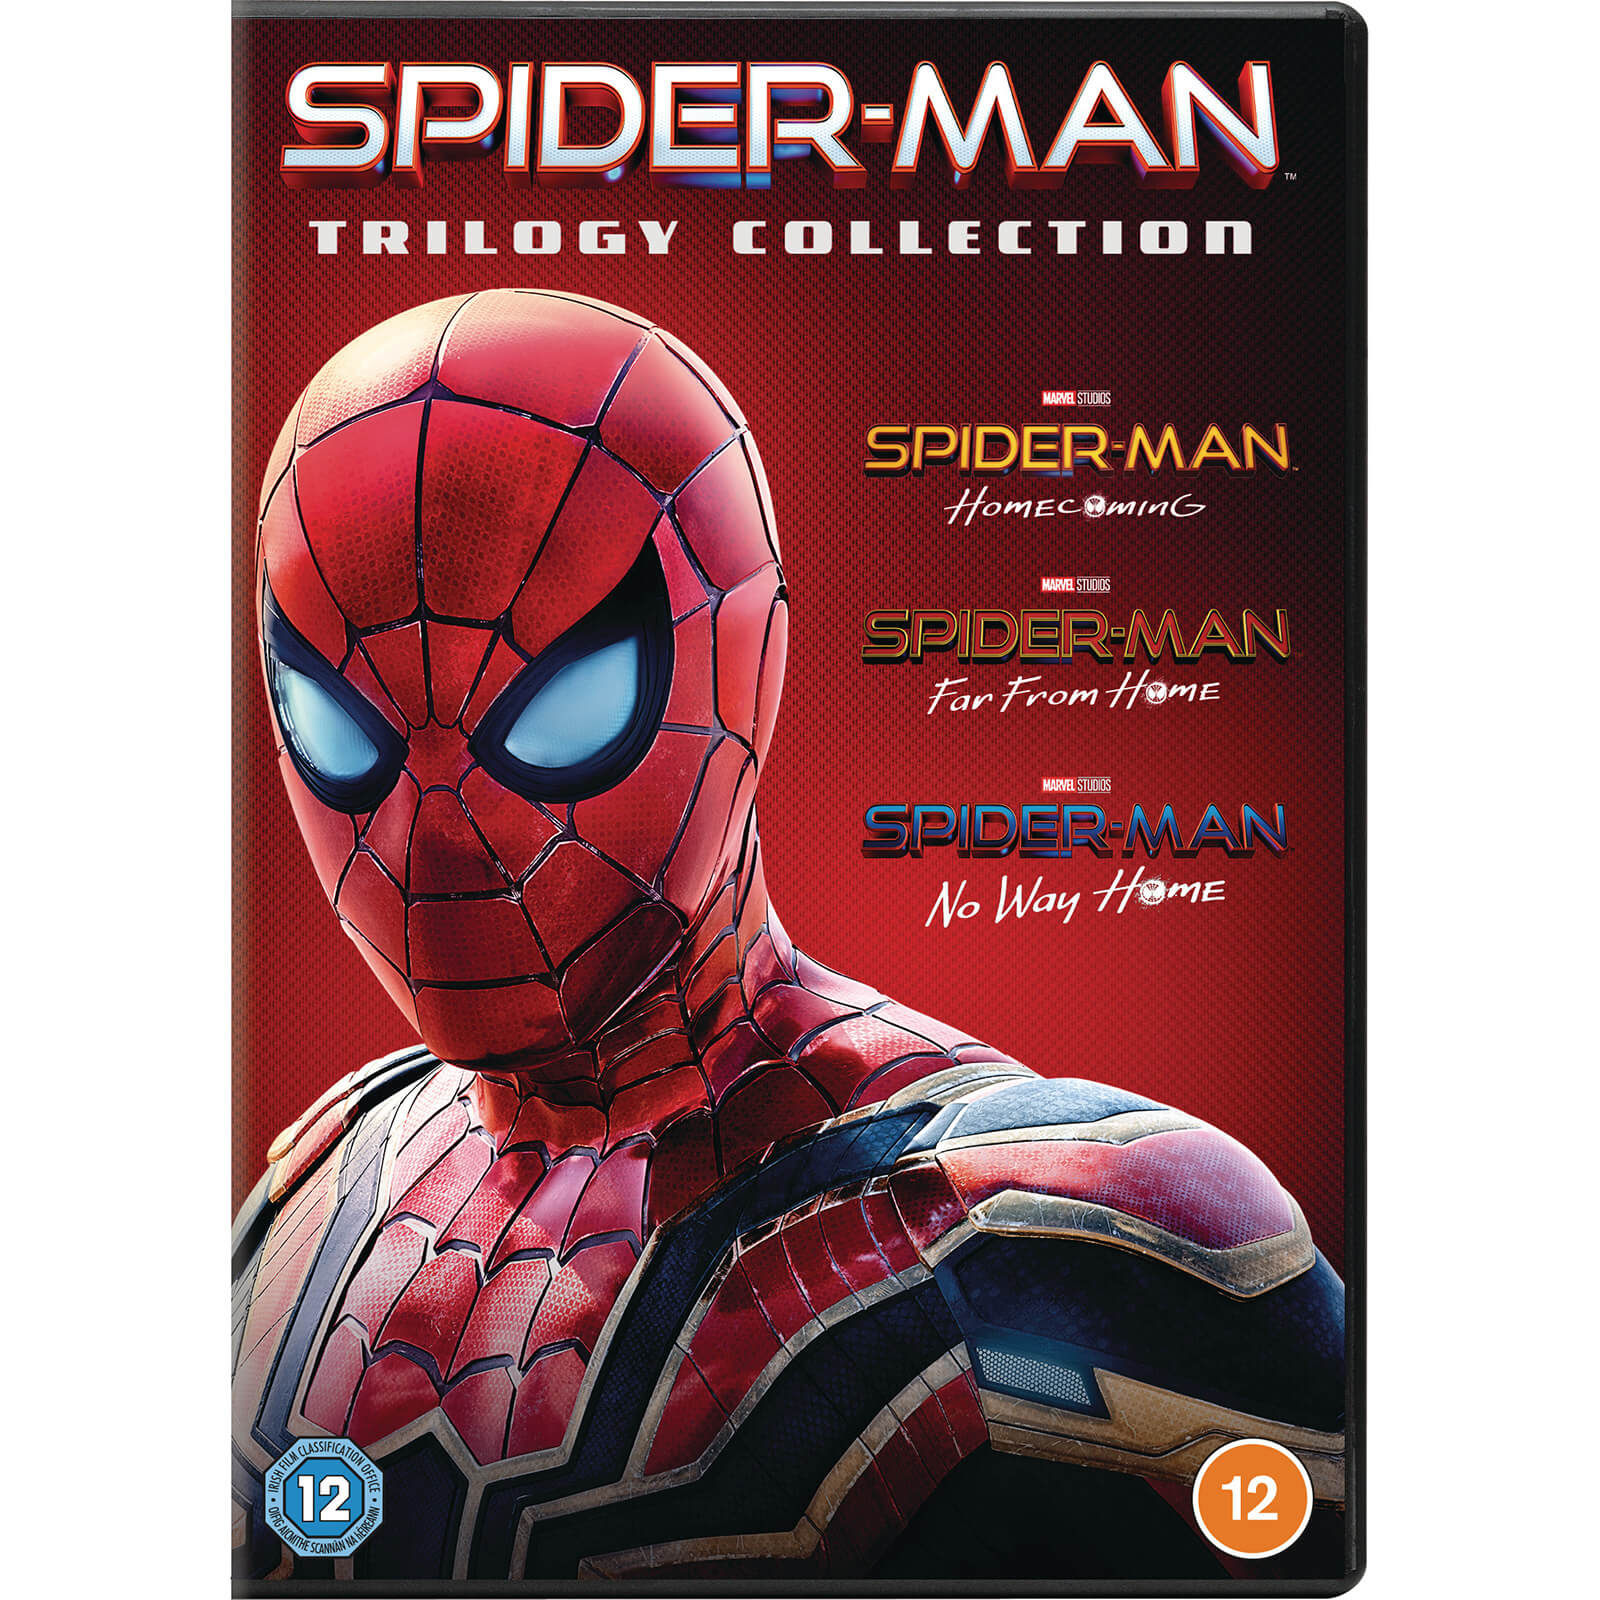 Spider-Man Triple: Home Coming, Far from Home & No Way Home von Marvel Studios